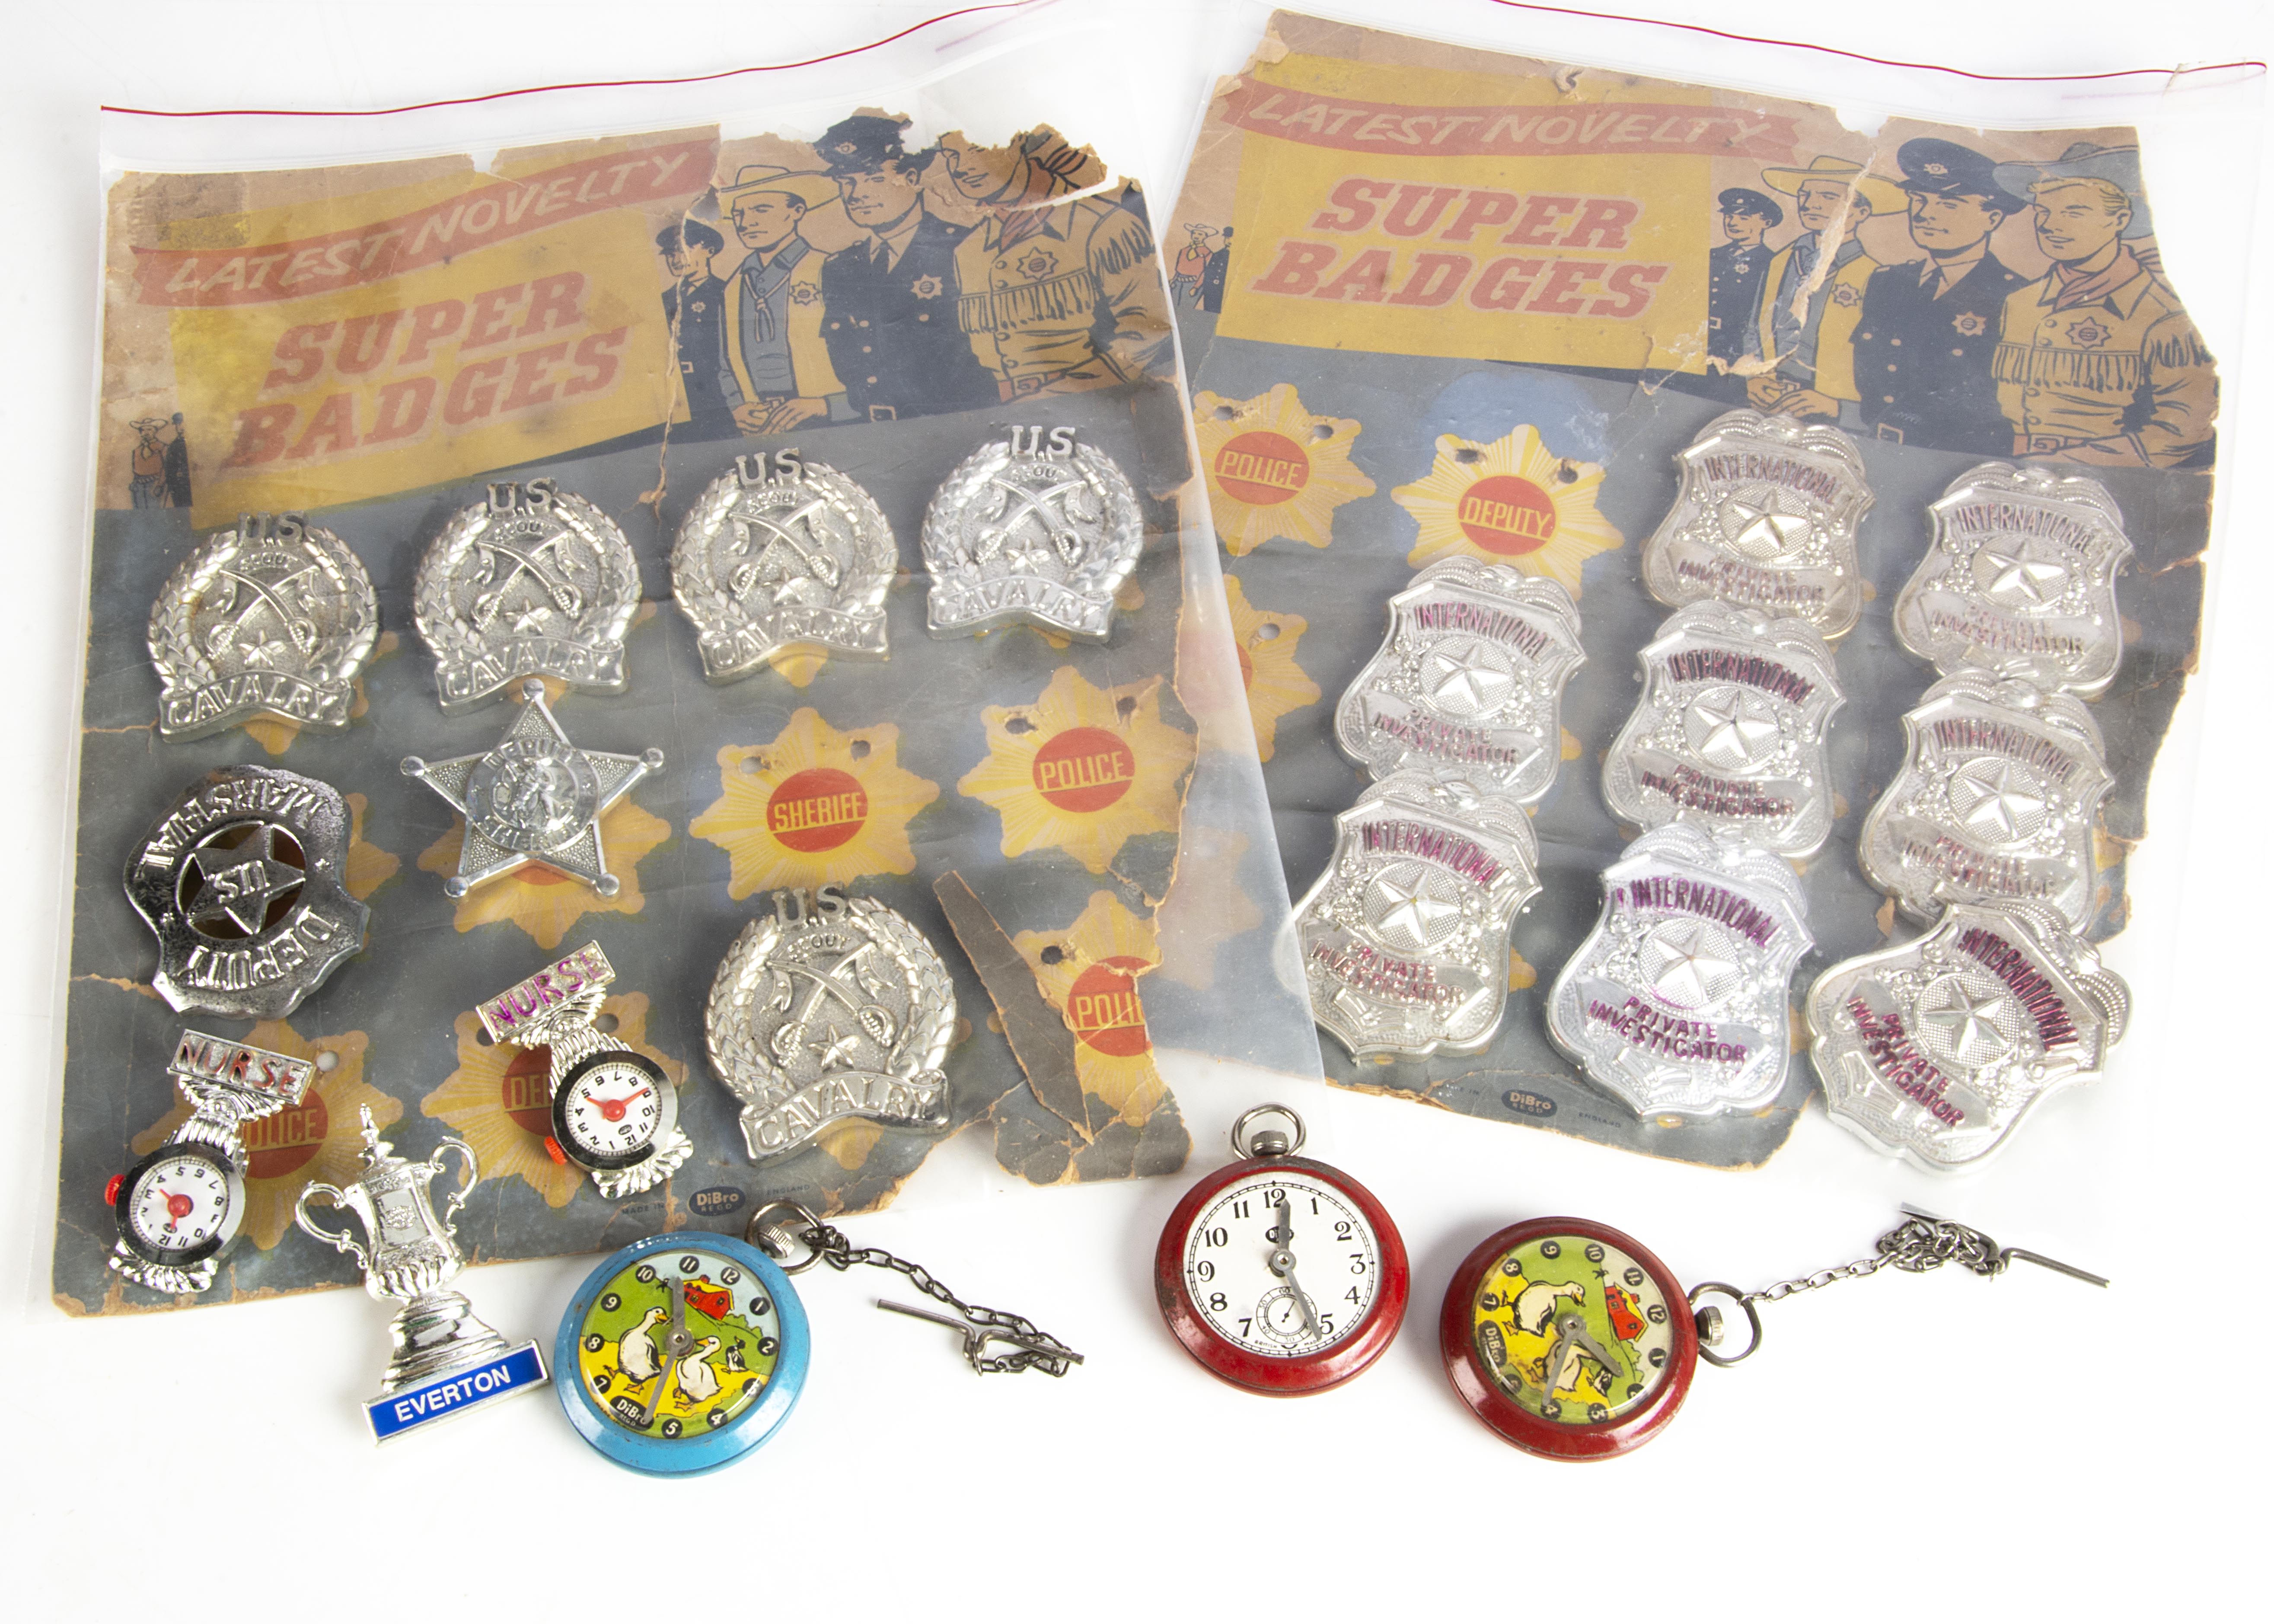 Dibro Toys, including two Super Badges shop display cards, first with six badges, second with